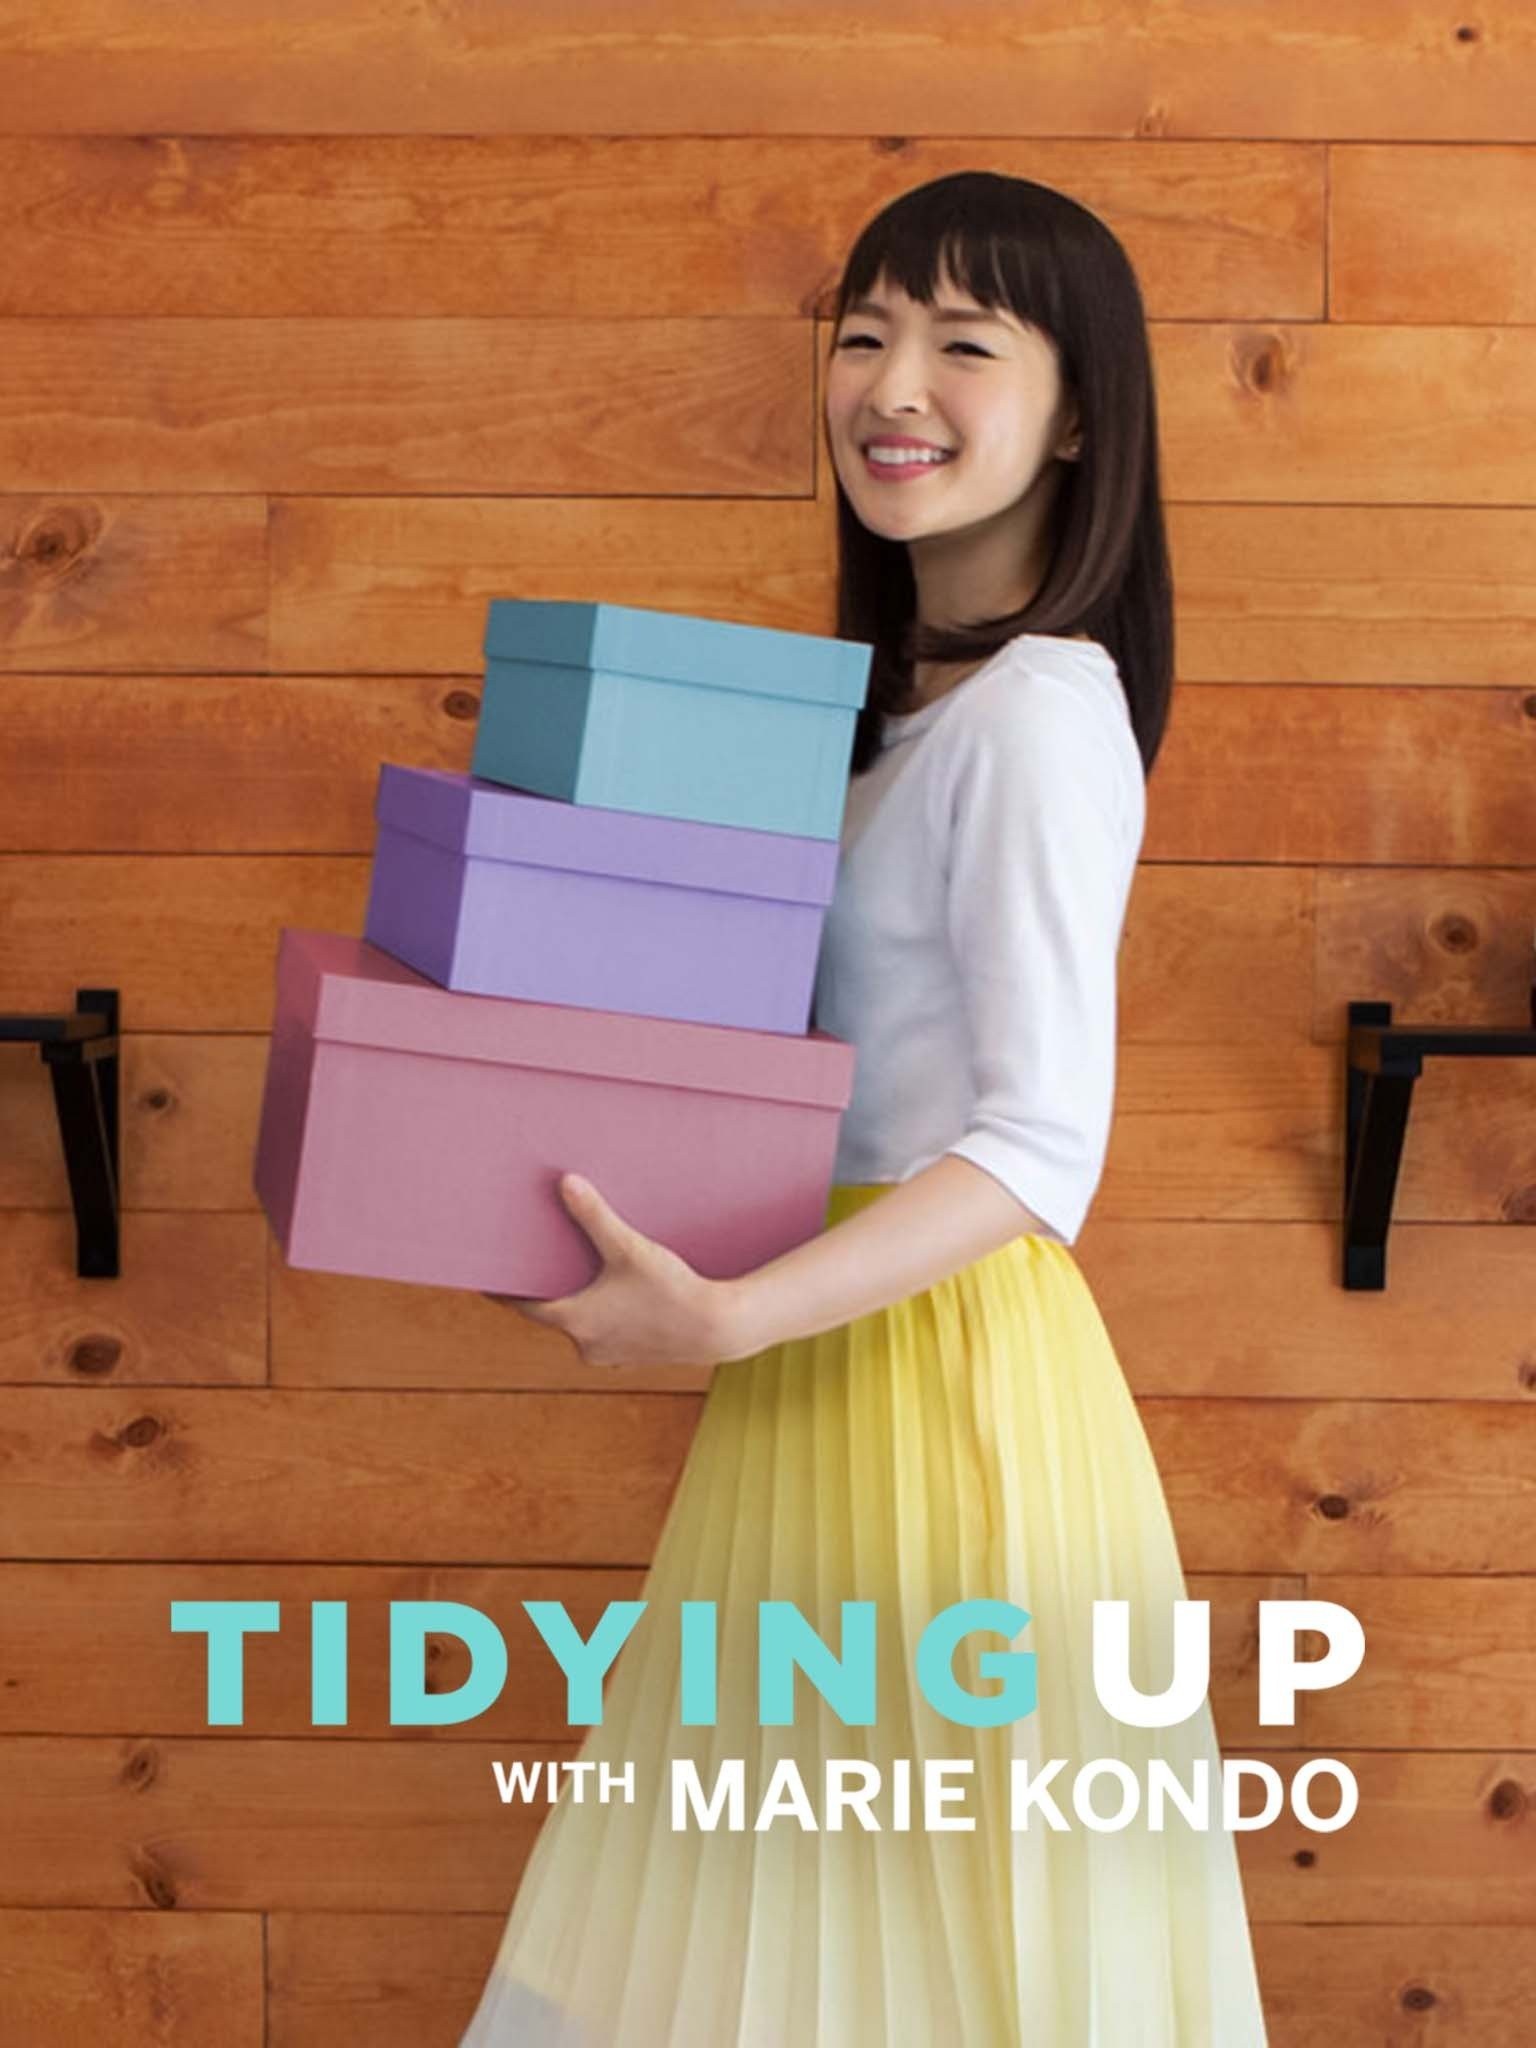 Don't mess with Marie: tidying up with author and Netflix star Marie Kondo, Homes